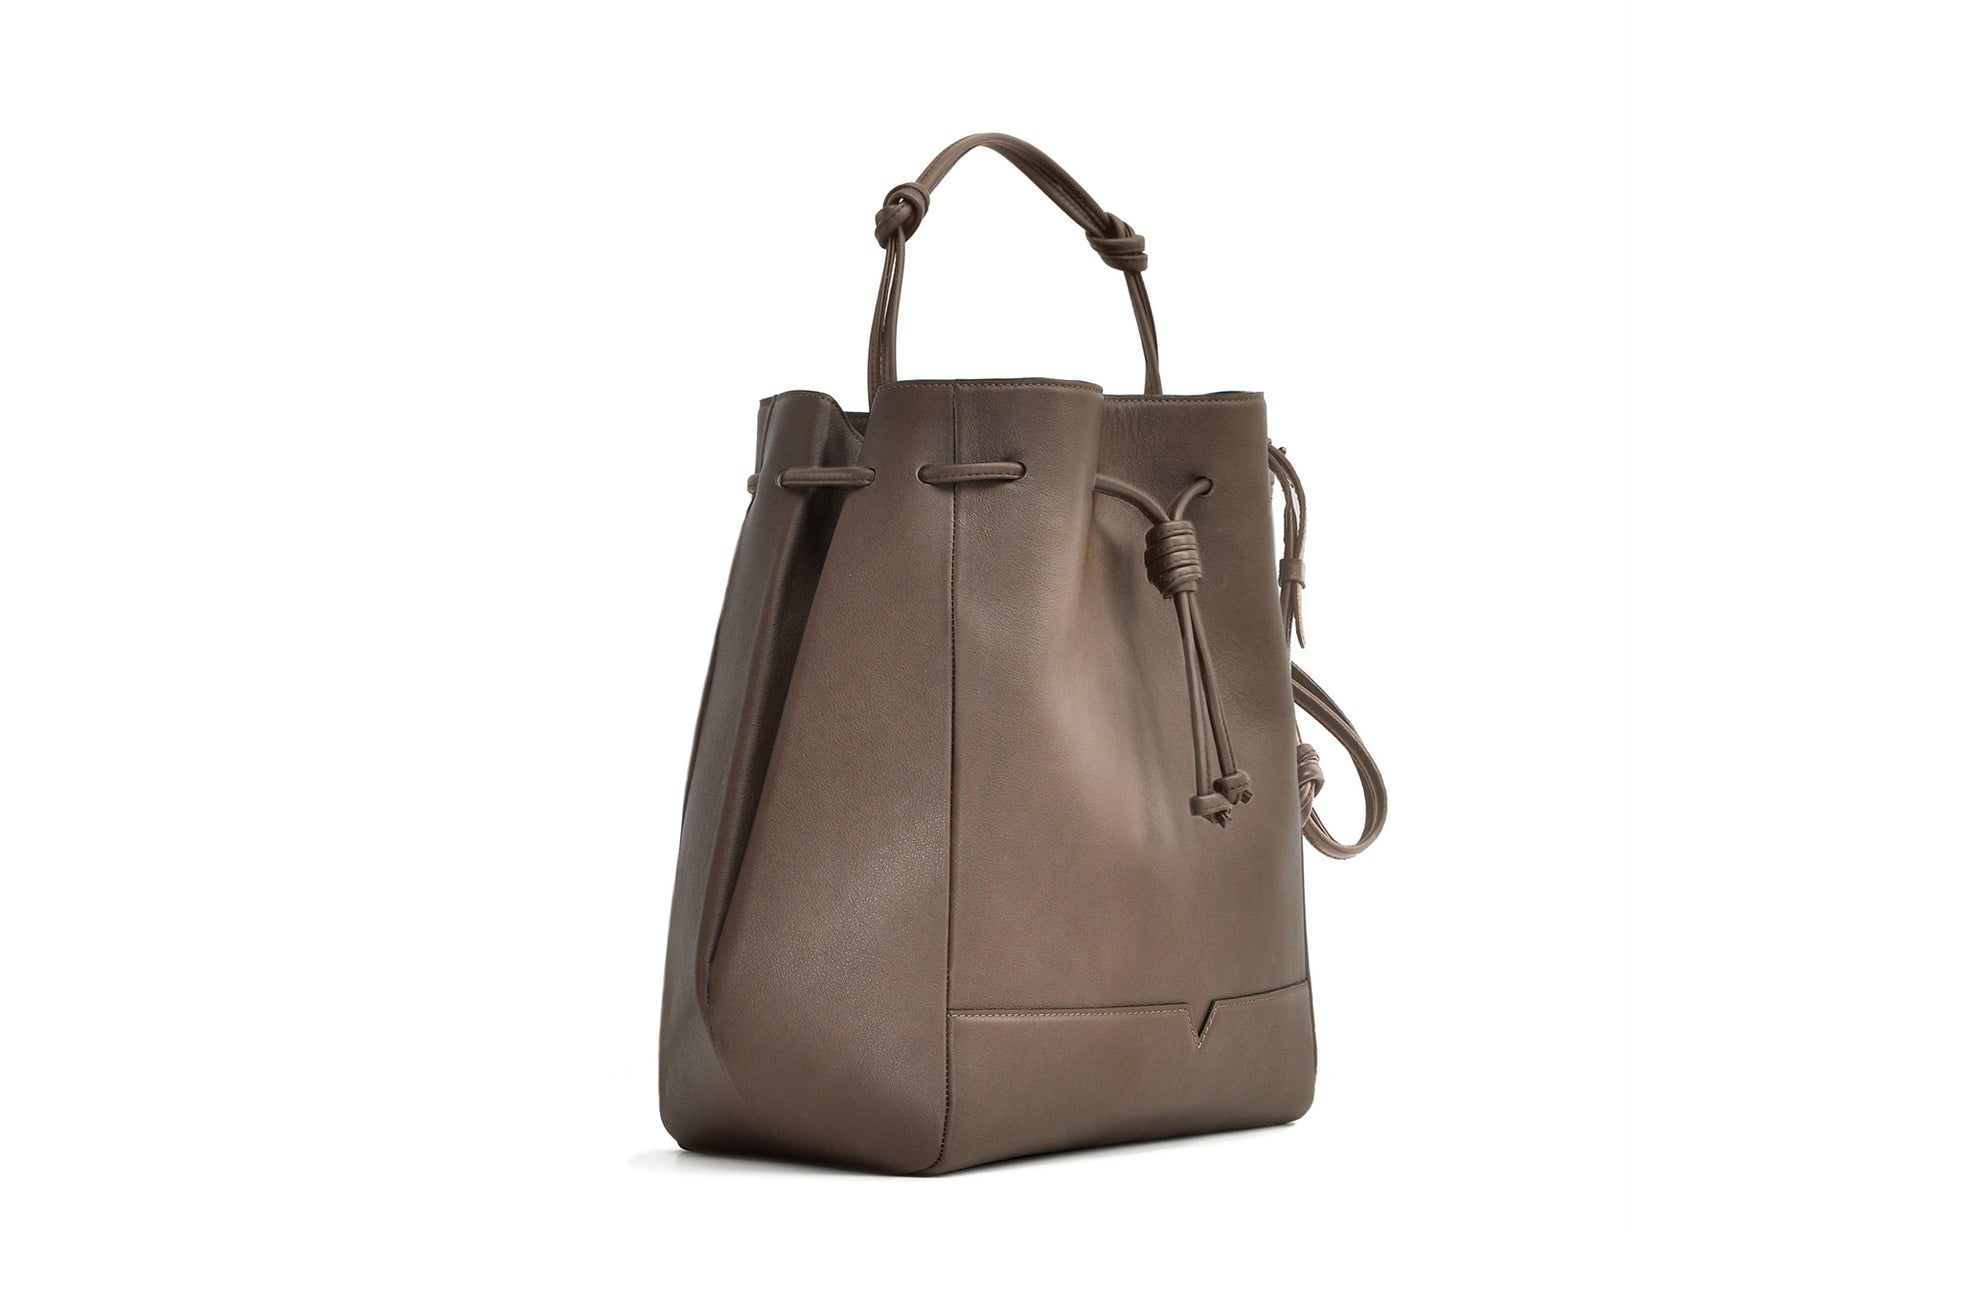 The Large Bucket Backpack in Technik-Leather in Taupe image 3